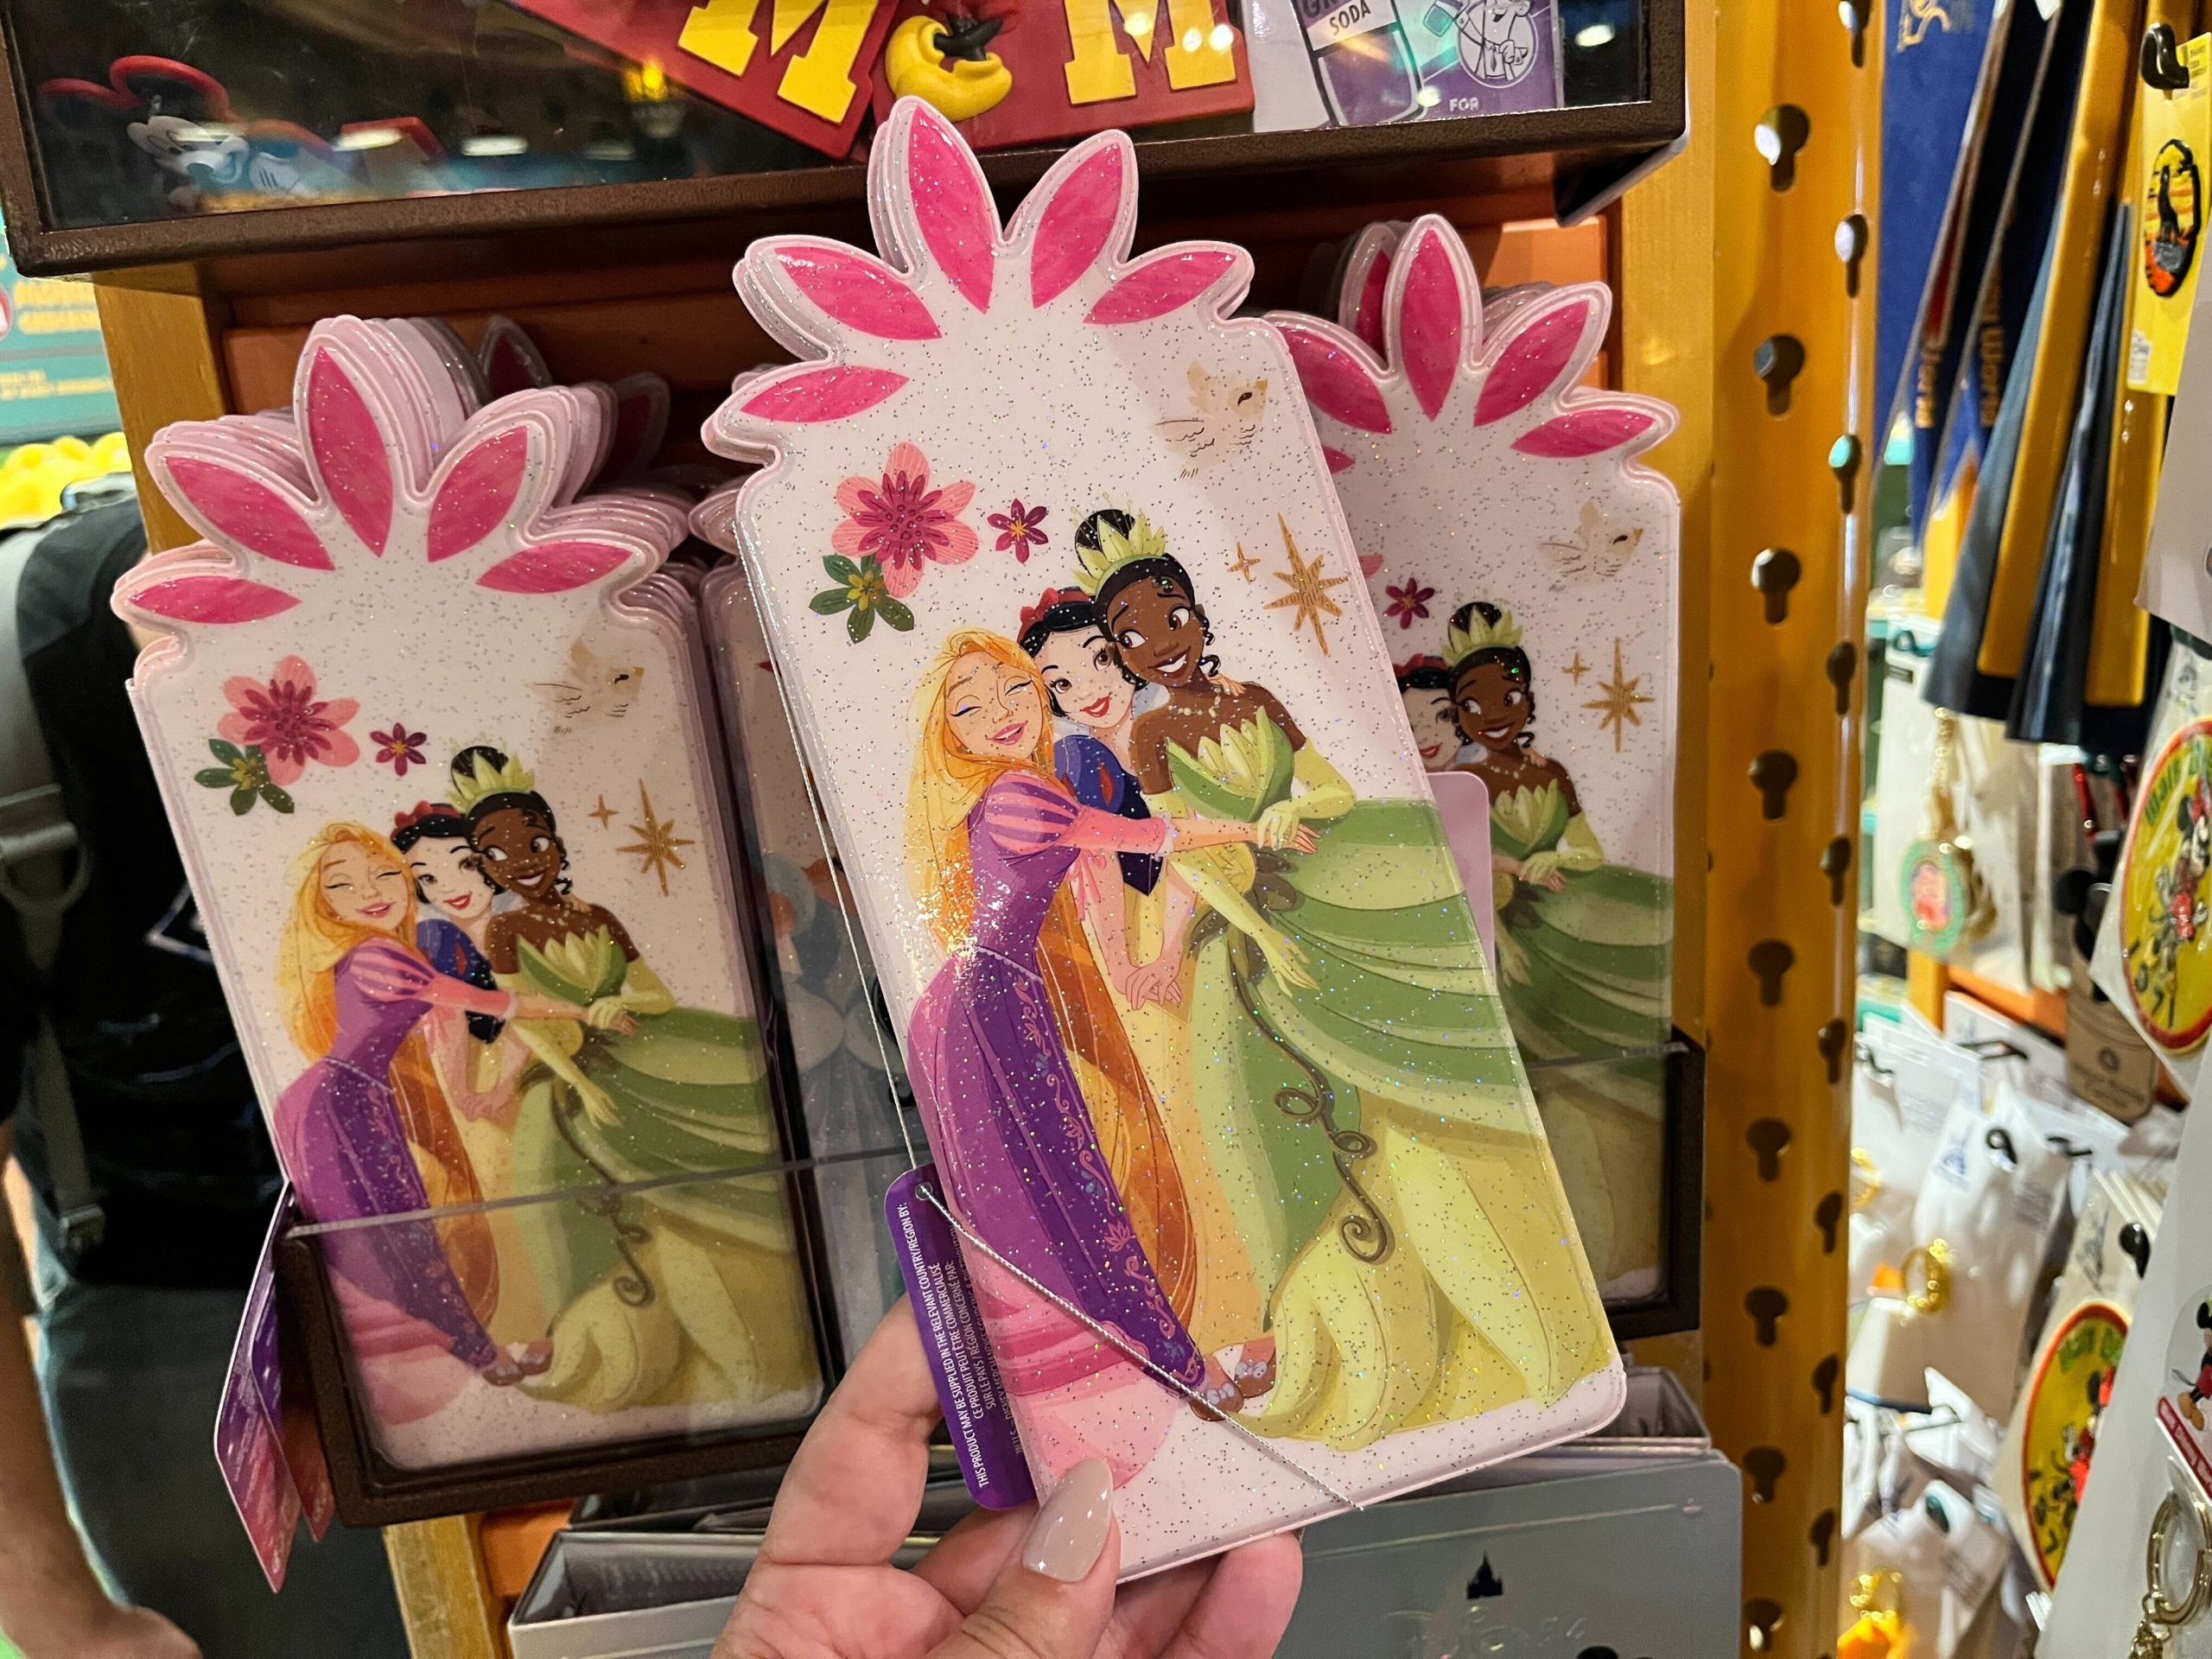 Entirely Emily: Pressed Penny Books for Disney World ( with